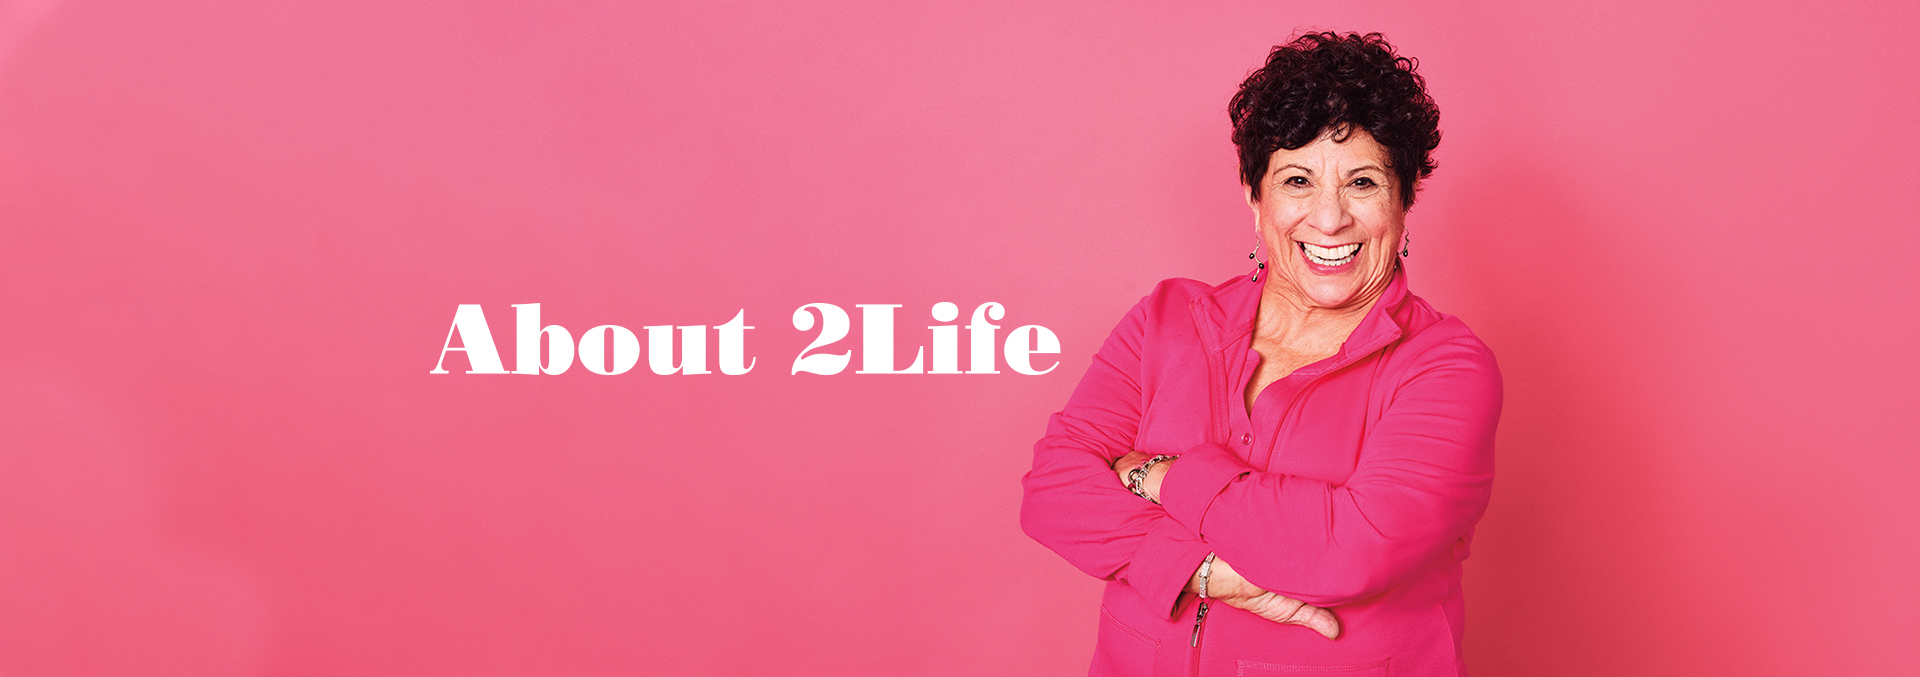 About 2Life banner with woman in pink against a pink background